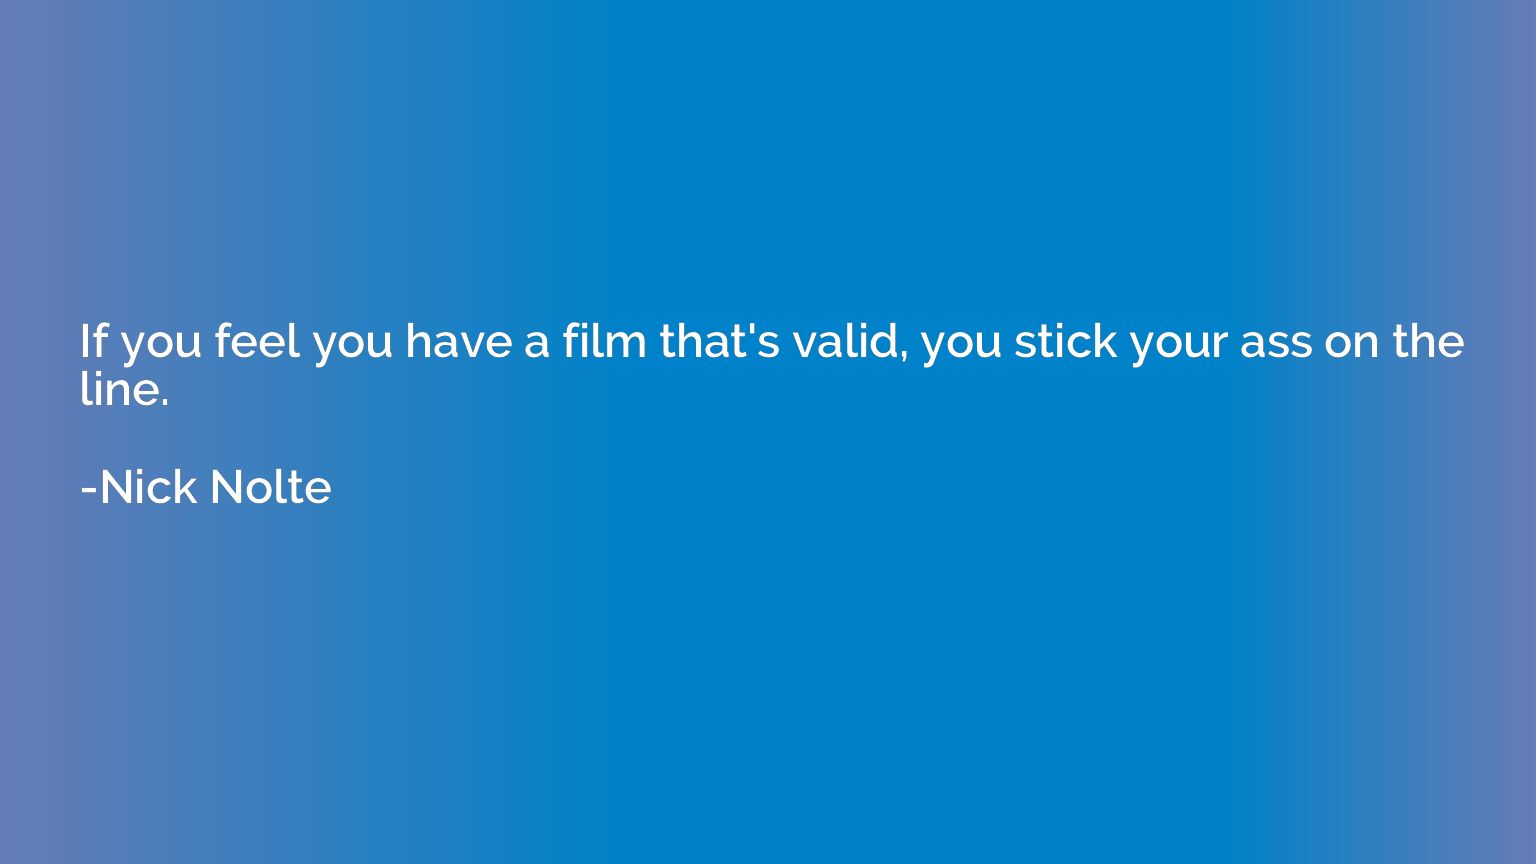 If you feel you have a film that's valid, you stick your ass